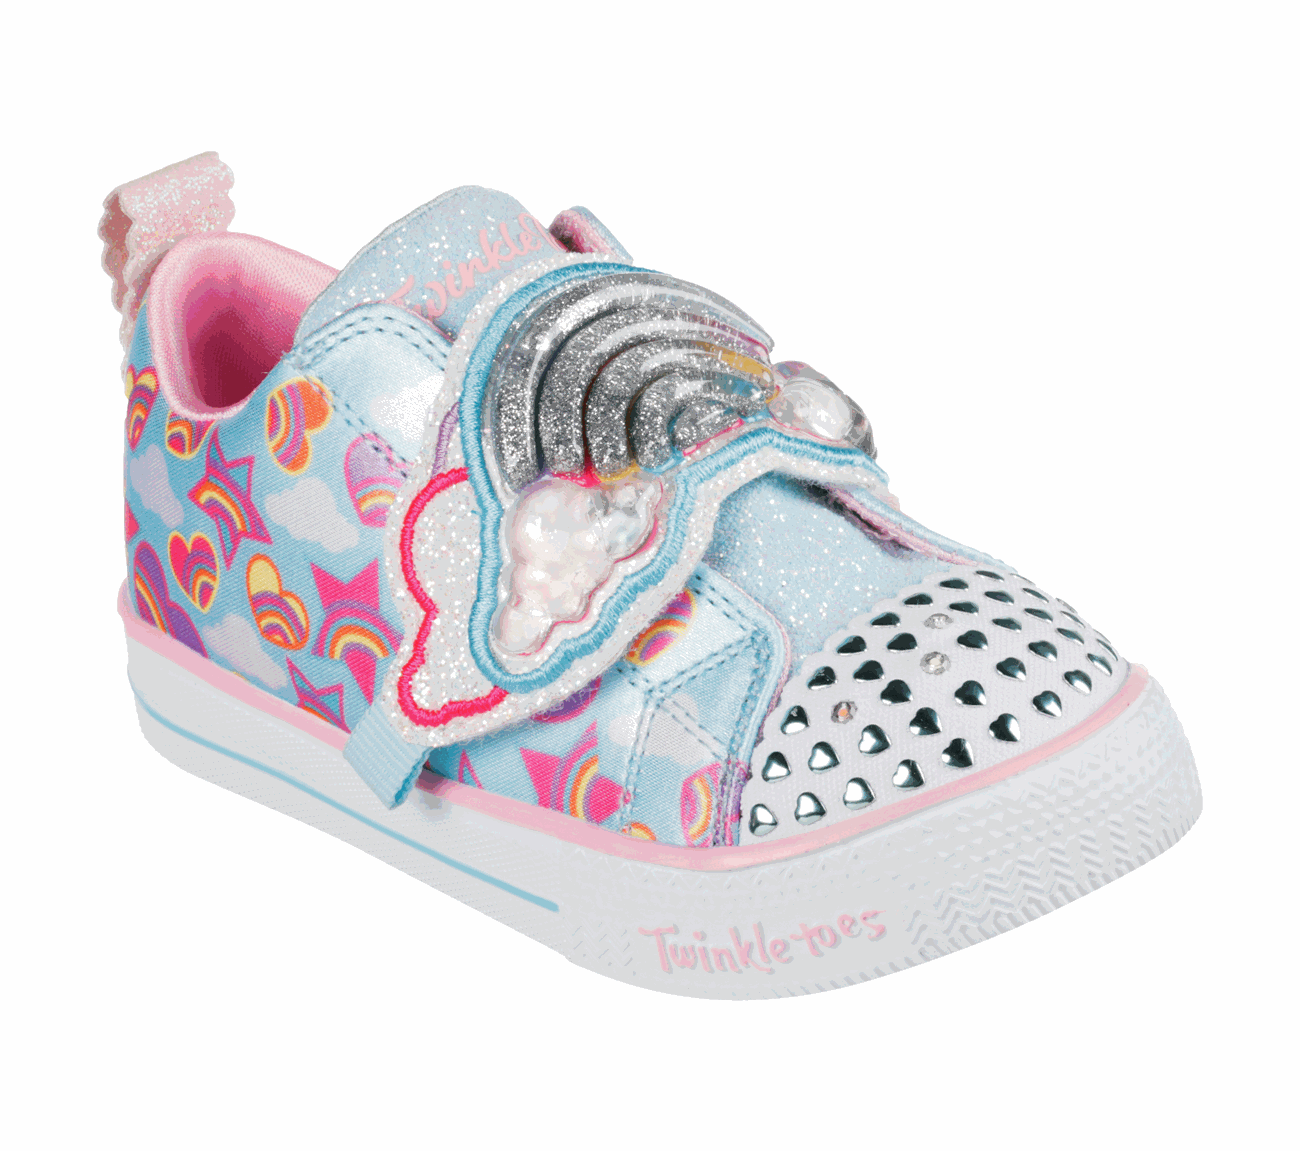 twinkle toe skating shoes neopets